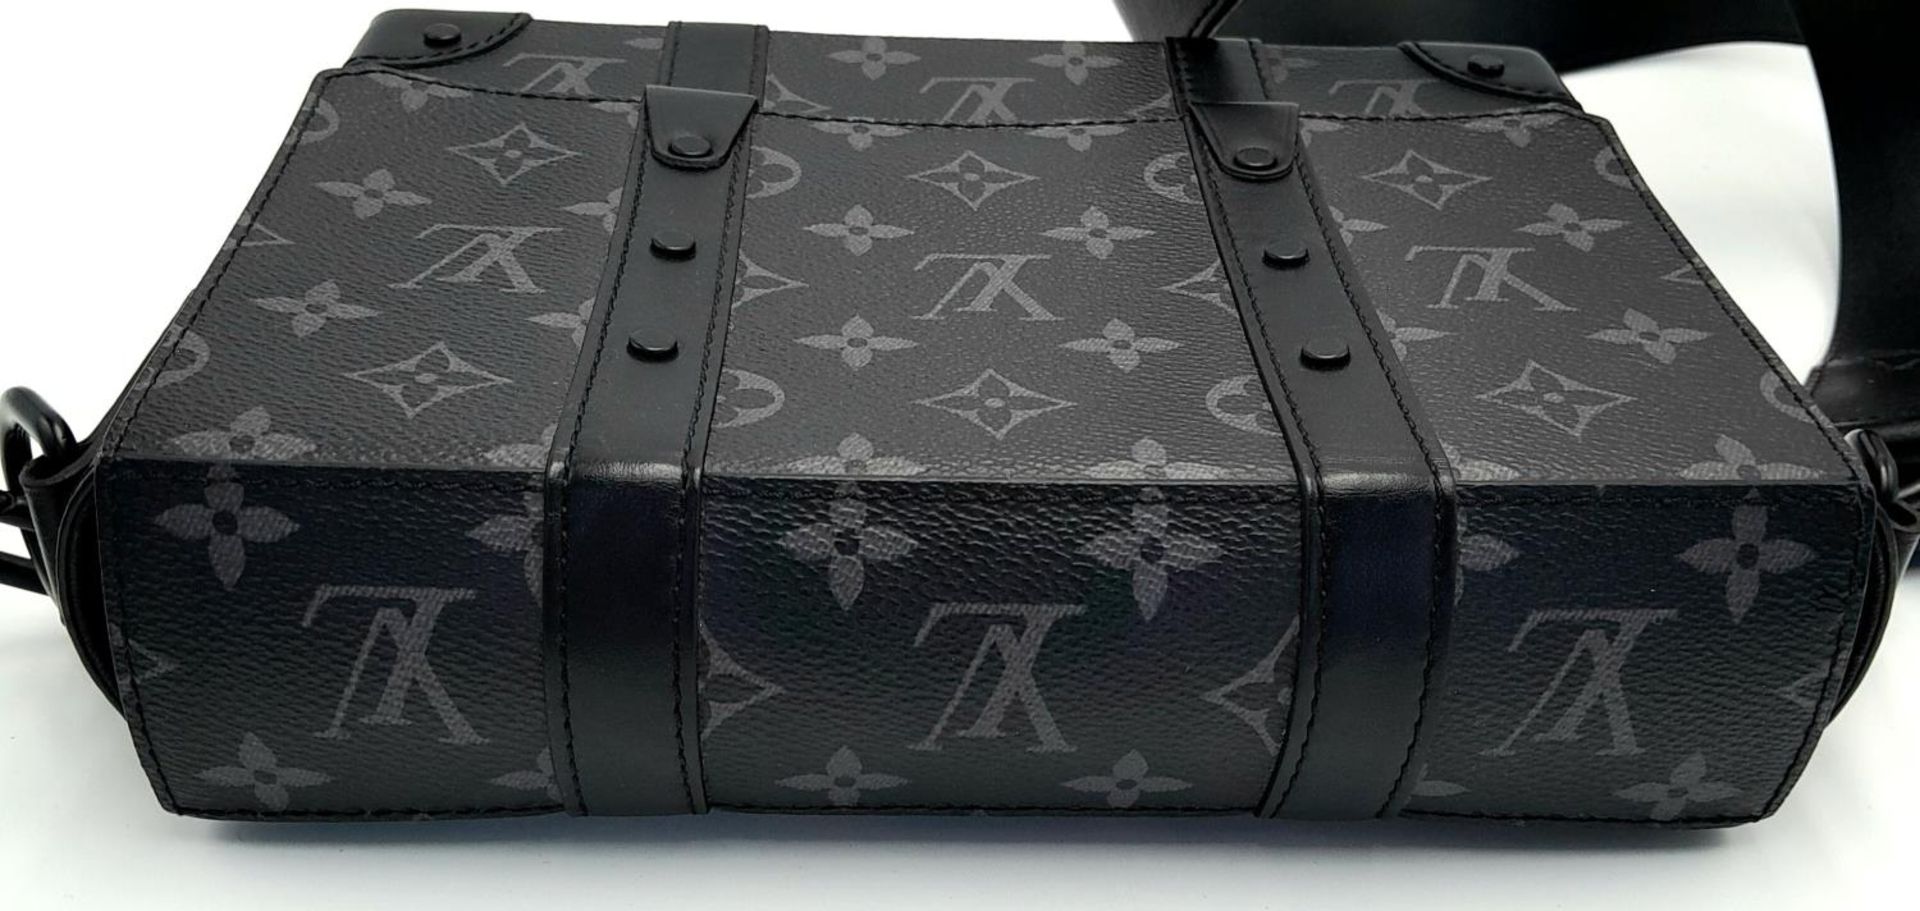 A Louis Vuitton Black Eclipse Trunk Messenger Bag. Monogramed canvas exterior with black-toned - Image 5 of 10